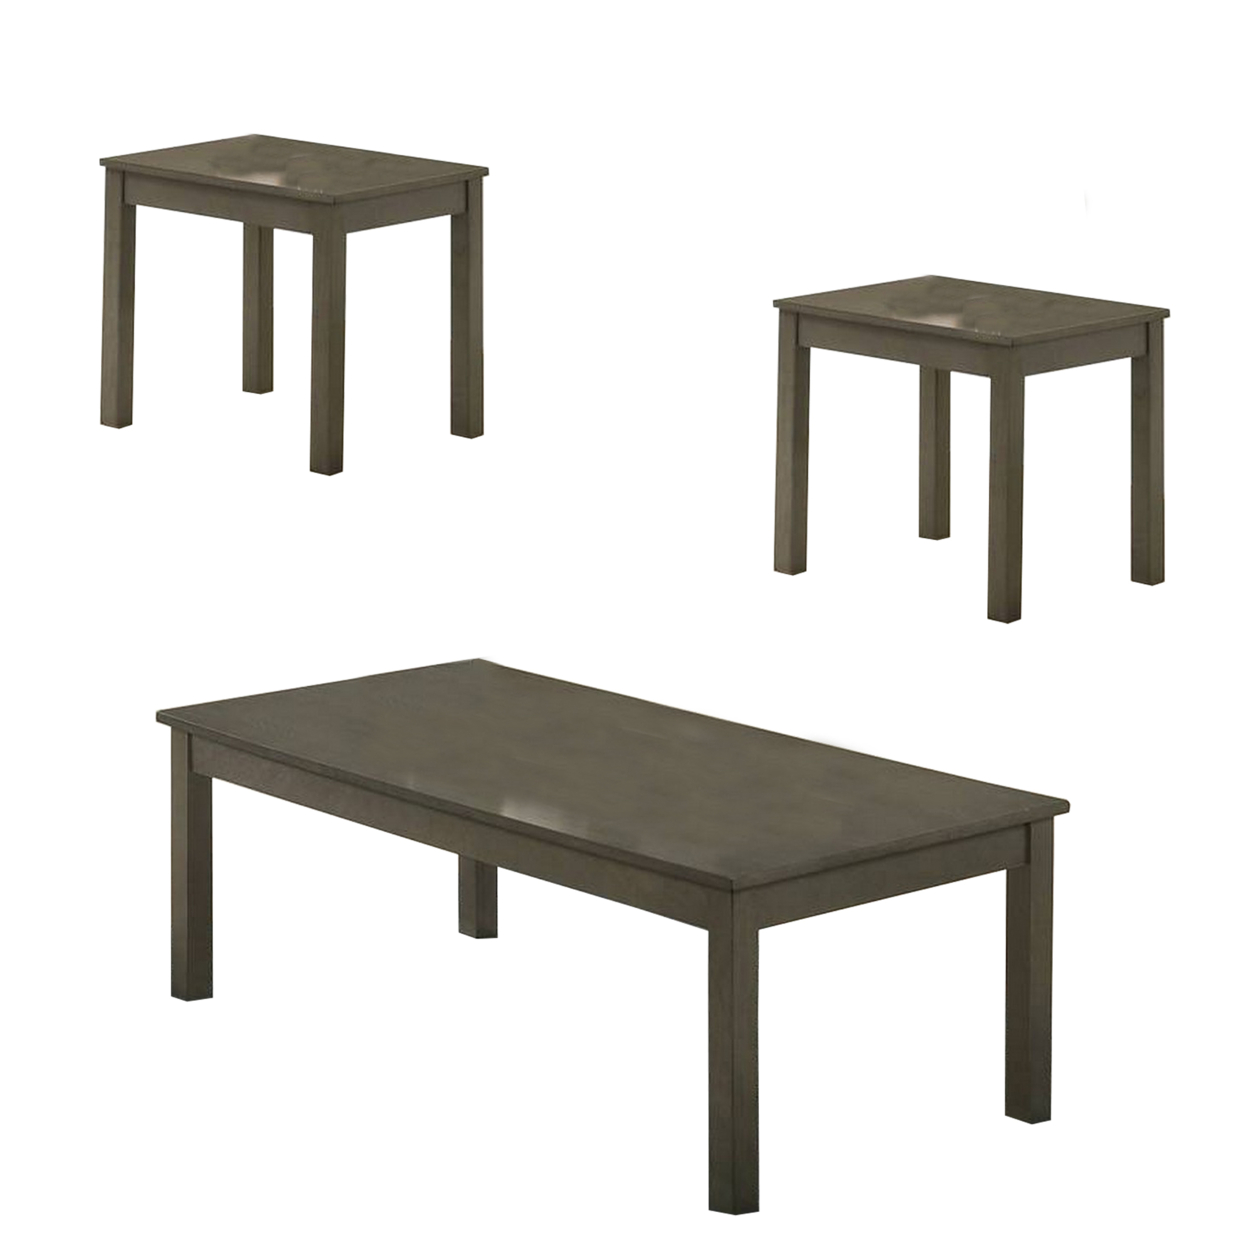 3 Piece Transitional Coffee Table And End Table With Block Legs, Gray- Saltoro Sherpi